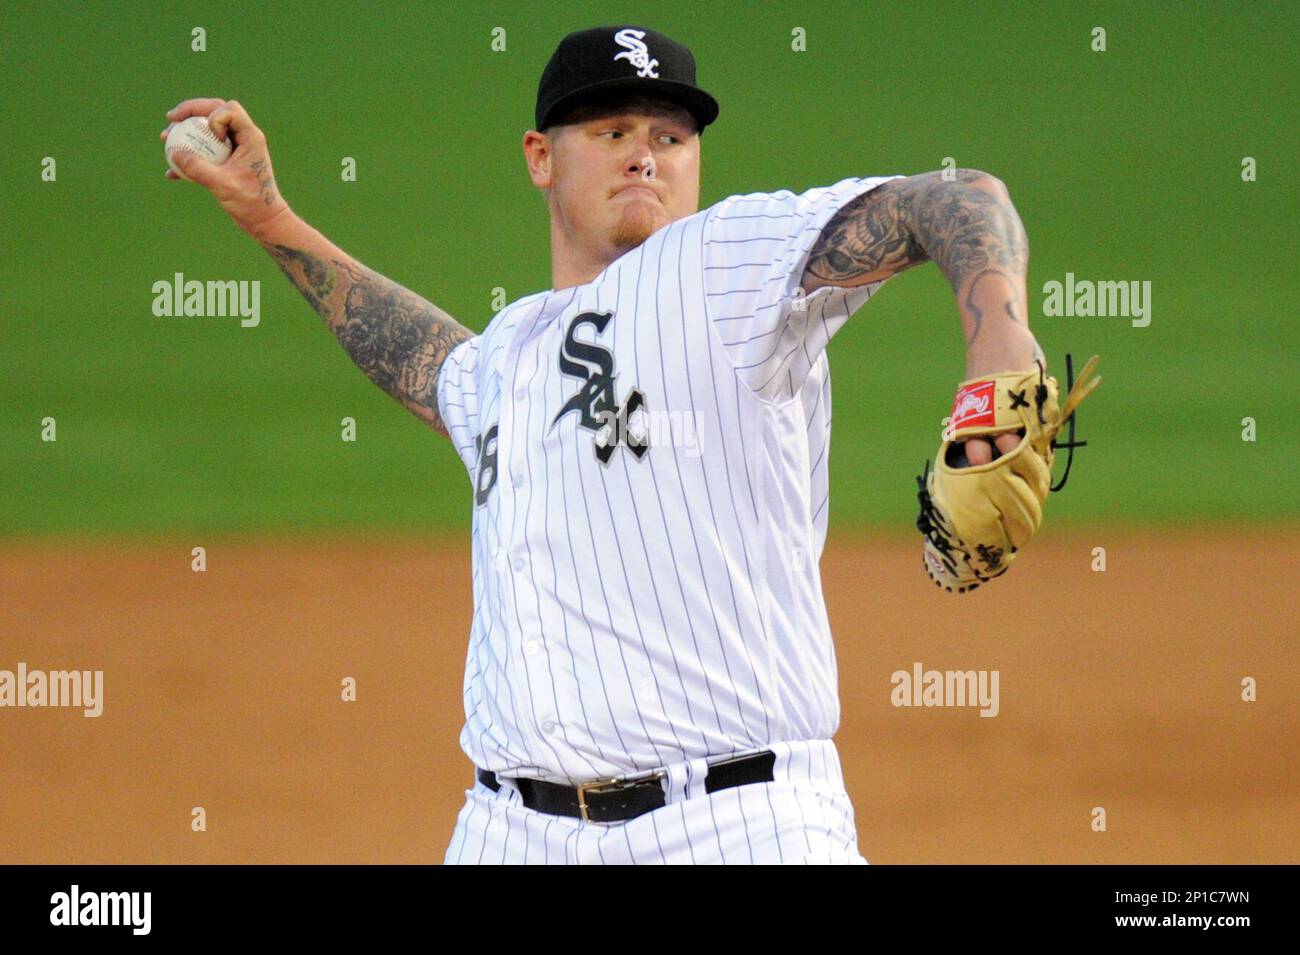 18 May 2016: Chicago White Sox Starting pitcher Mat Latos (38) [7517]  pitches during a game between the Houston Astros and the Chicago White Sox  at US Cellular Field in Chicago, IL. (